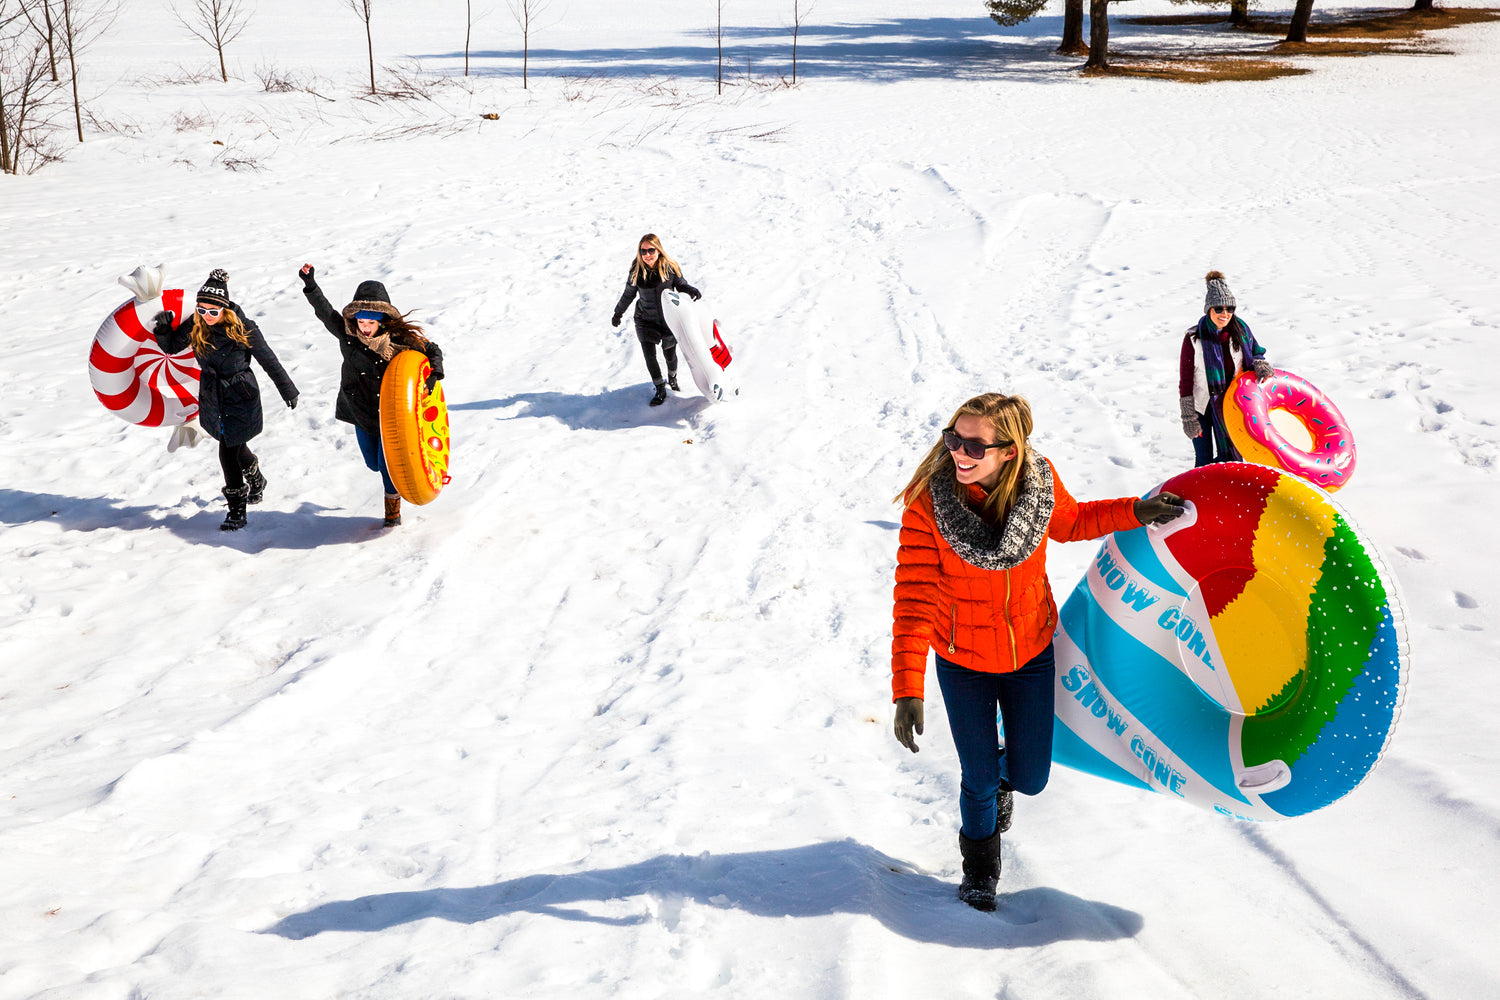 Snow Days don't have to be boring: go sledding with our fun snow tubes!